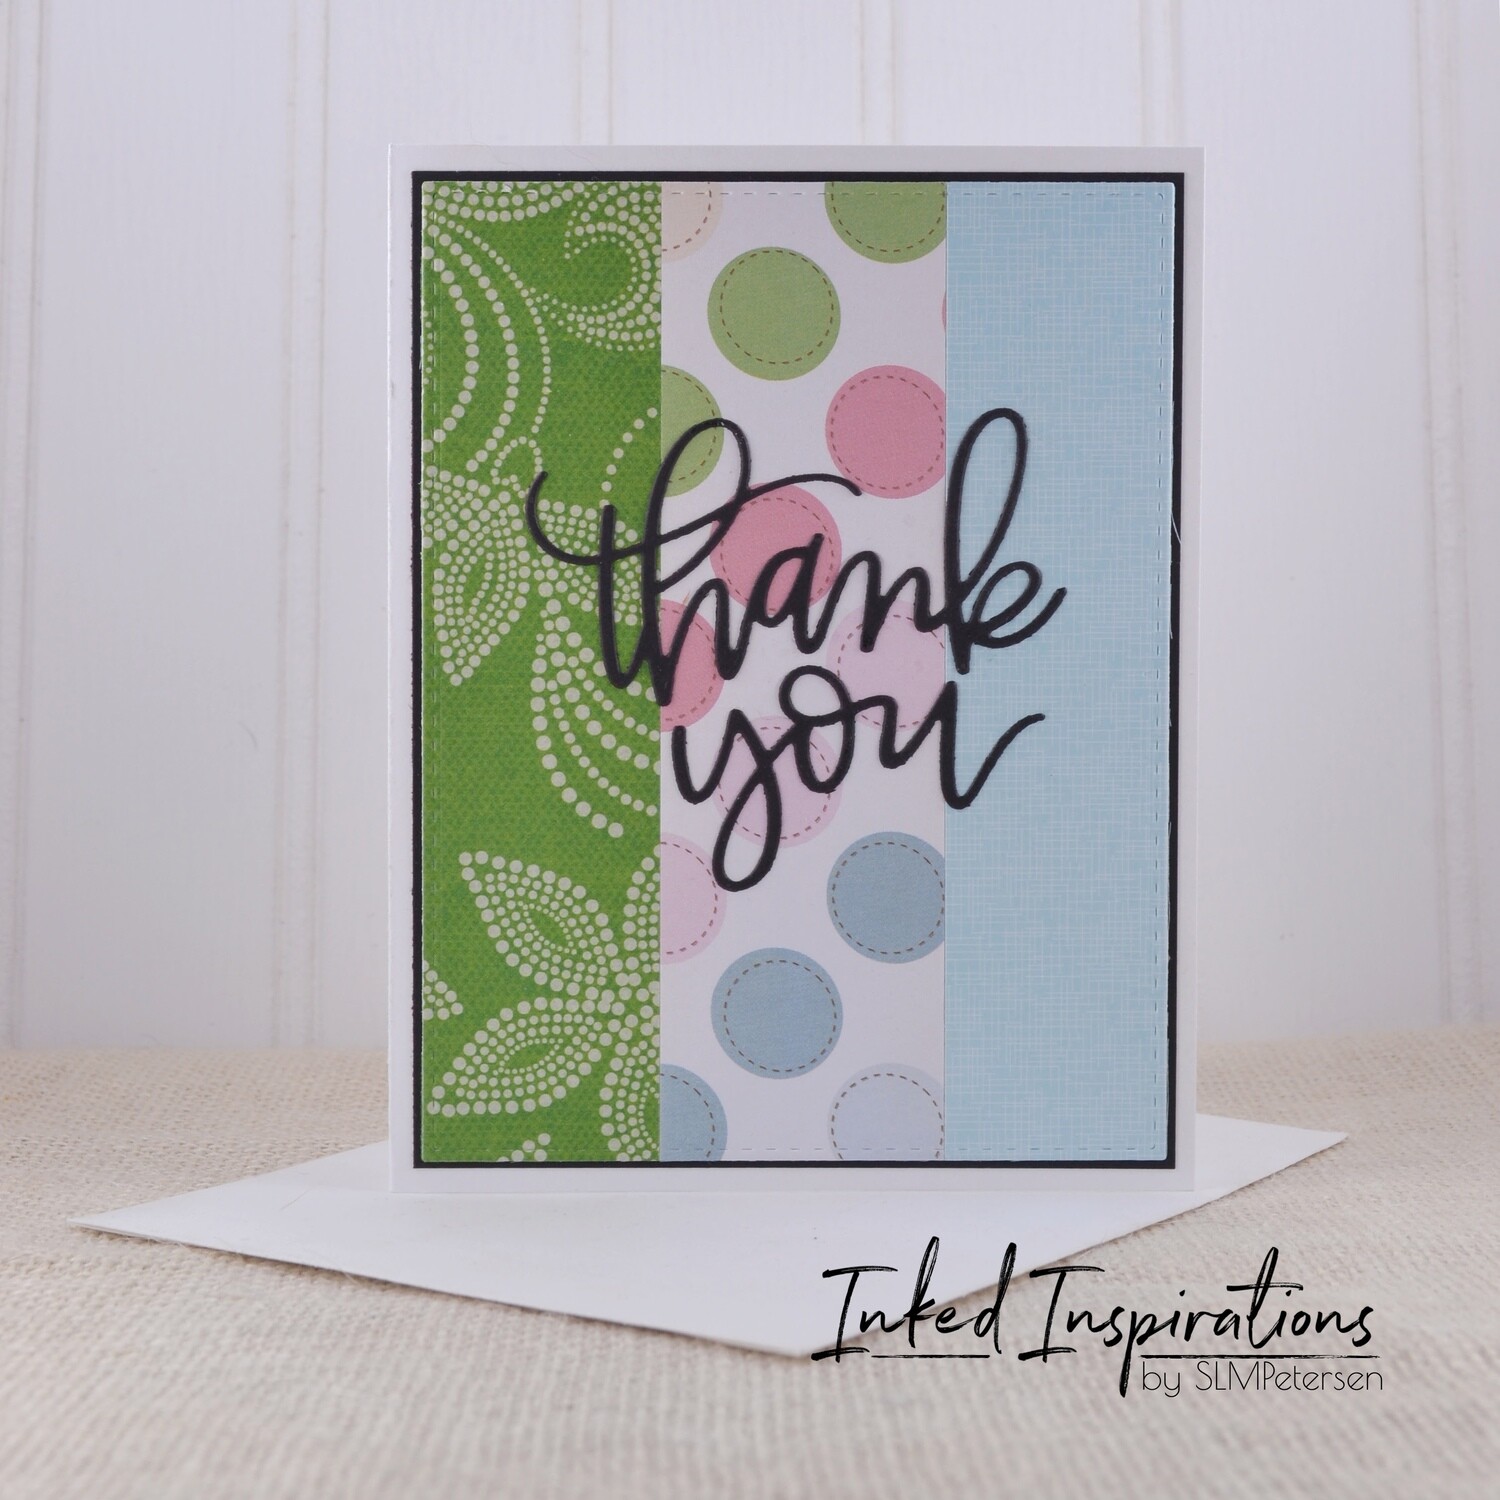 Thank you - Patterned Stripes